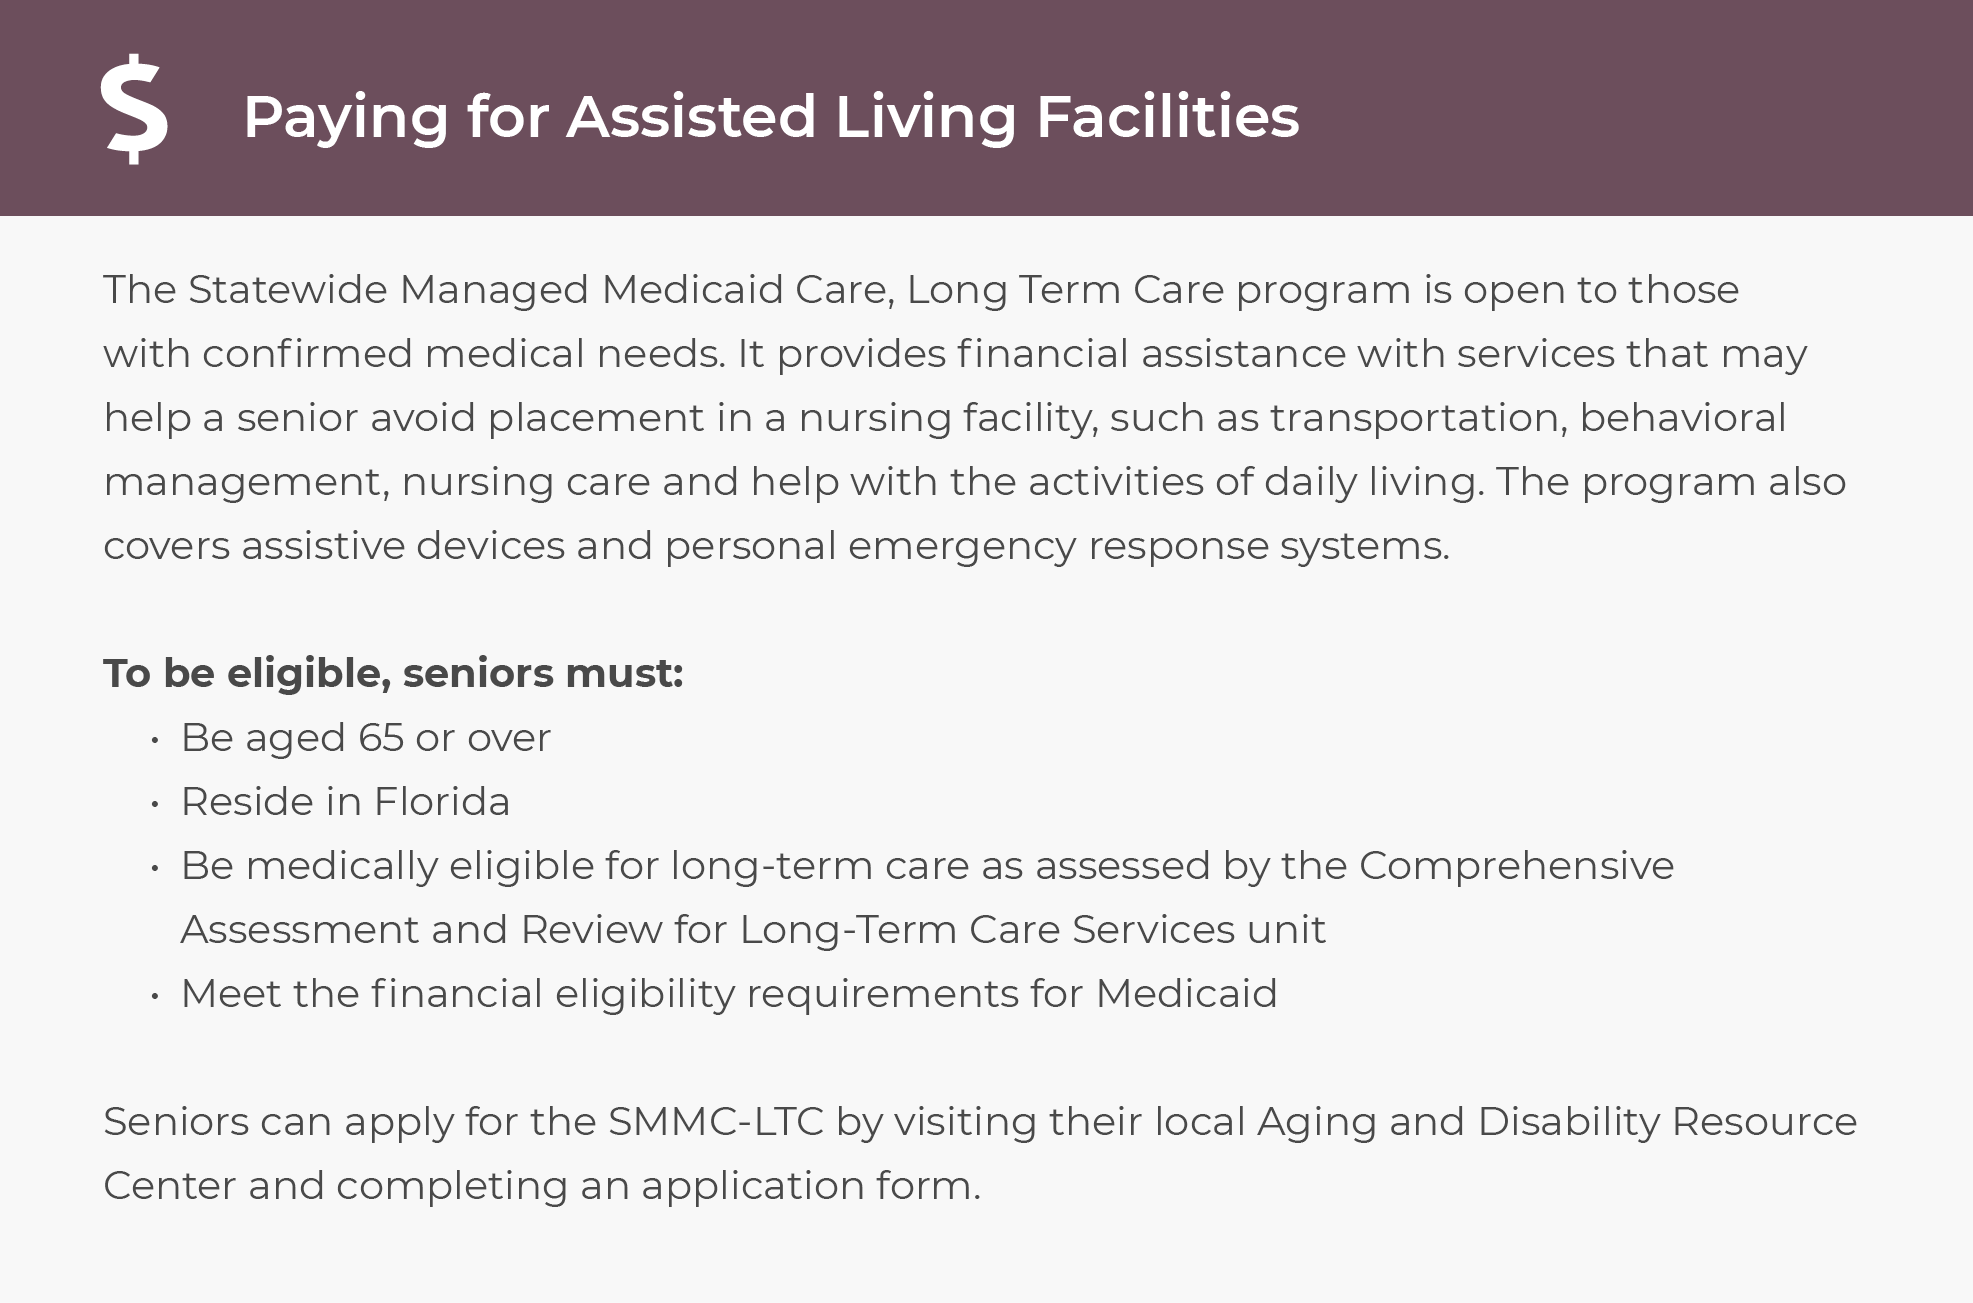 Paying for assisted living facilities in Florida